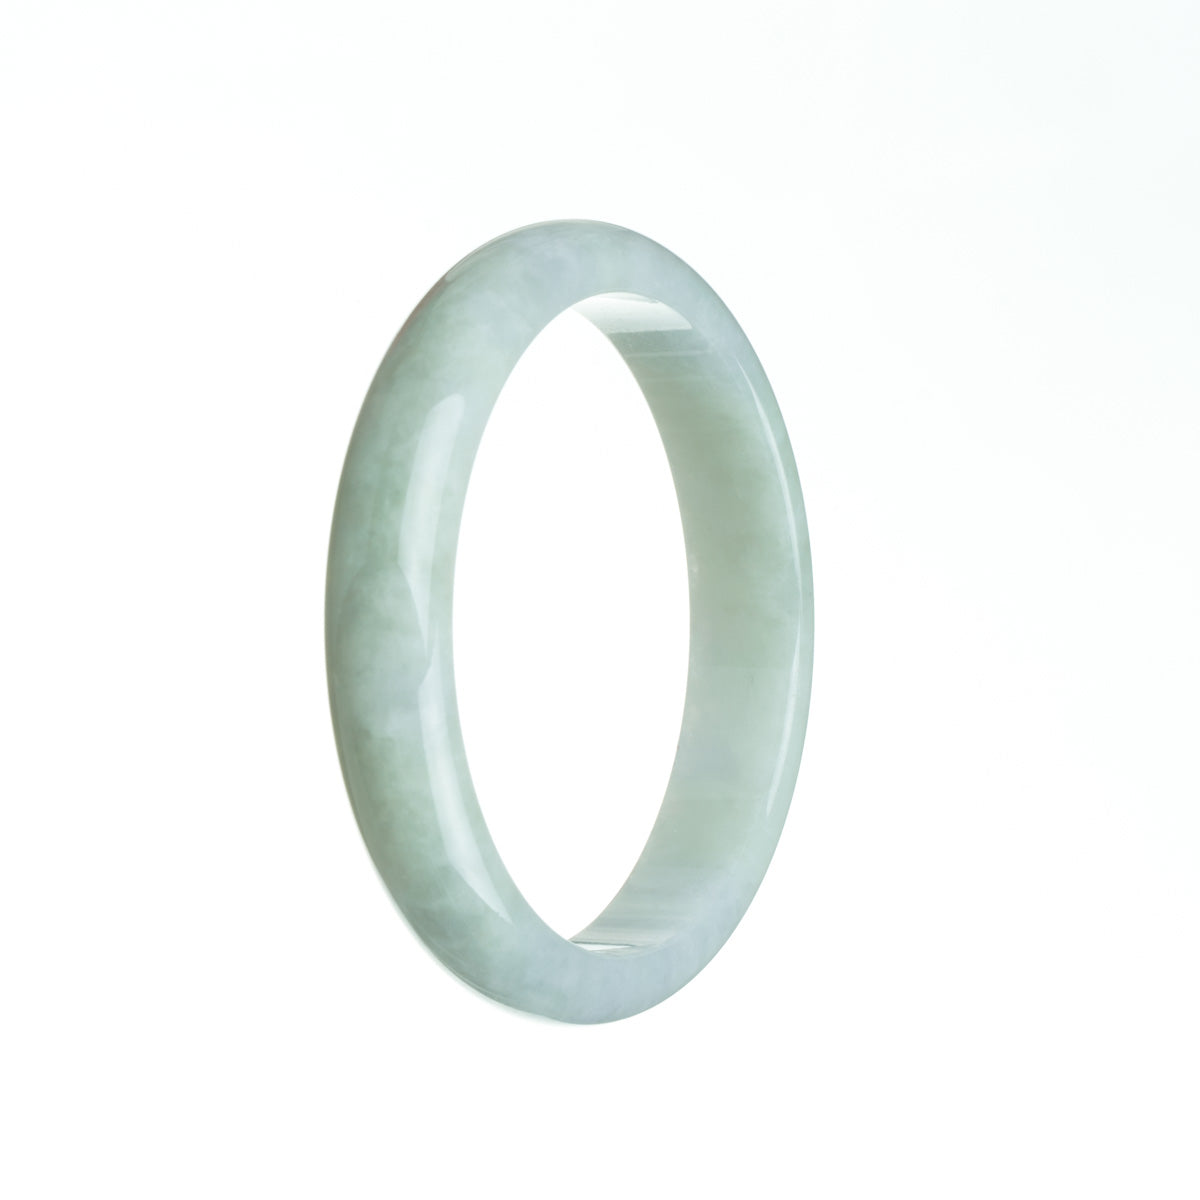 A half moon-shaped traditional jade bangle in a real pale green color with subtle hints of lavender.